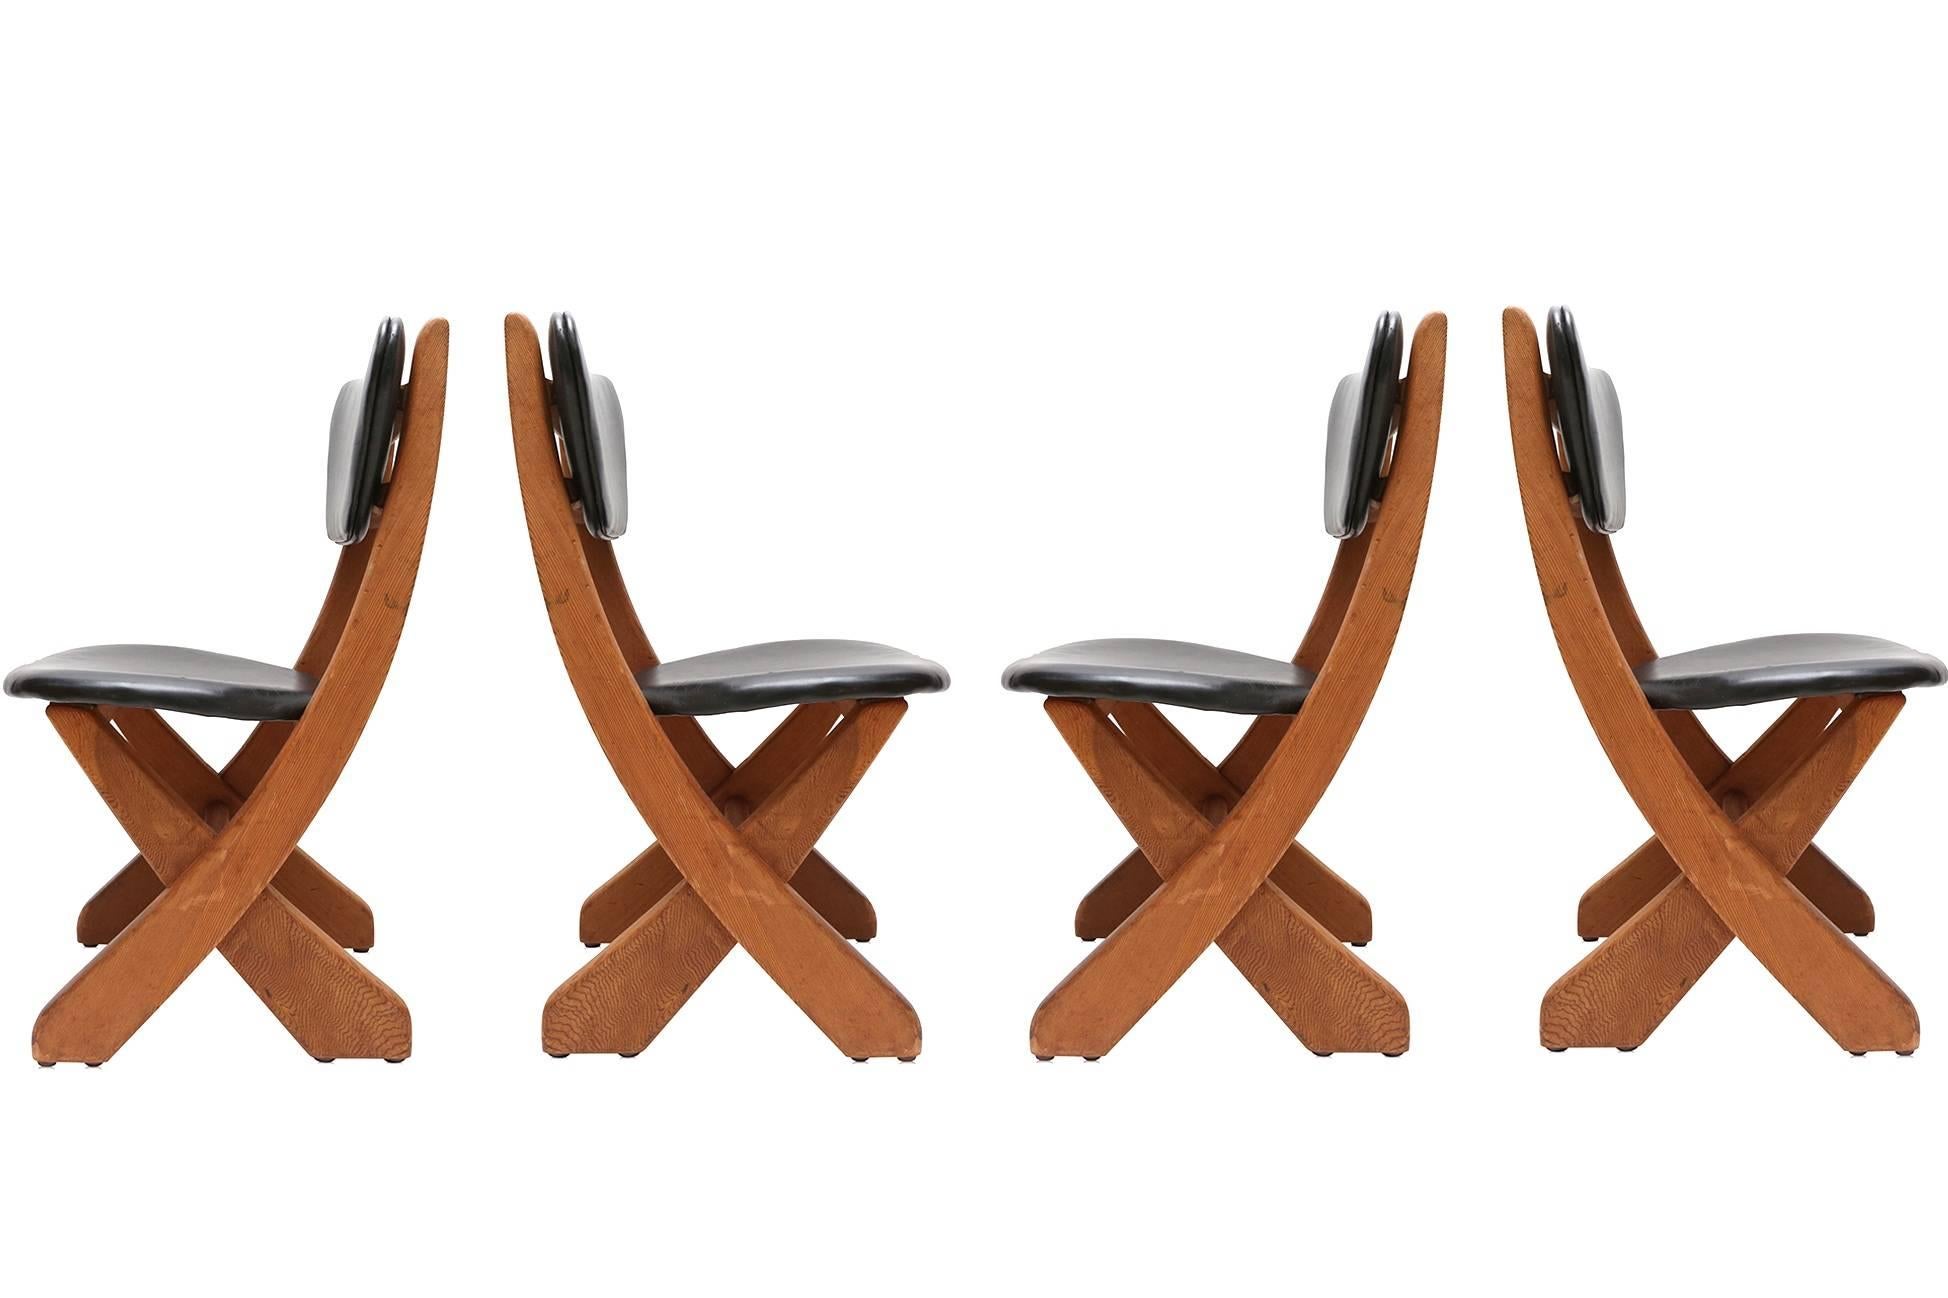 vintage chairs from the 1960s with an unusual and scissor like sculptural wooden frame
solid Pine, black leather.
Denmark
Would fit well in a Hans Wegner or Borge Mogensen inspired interior 